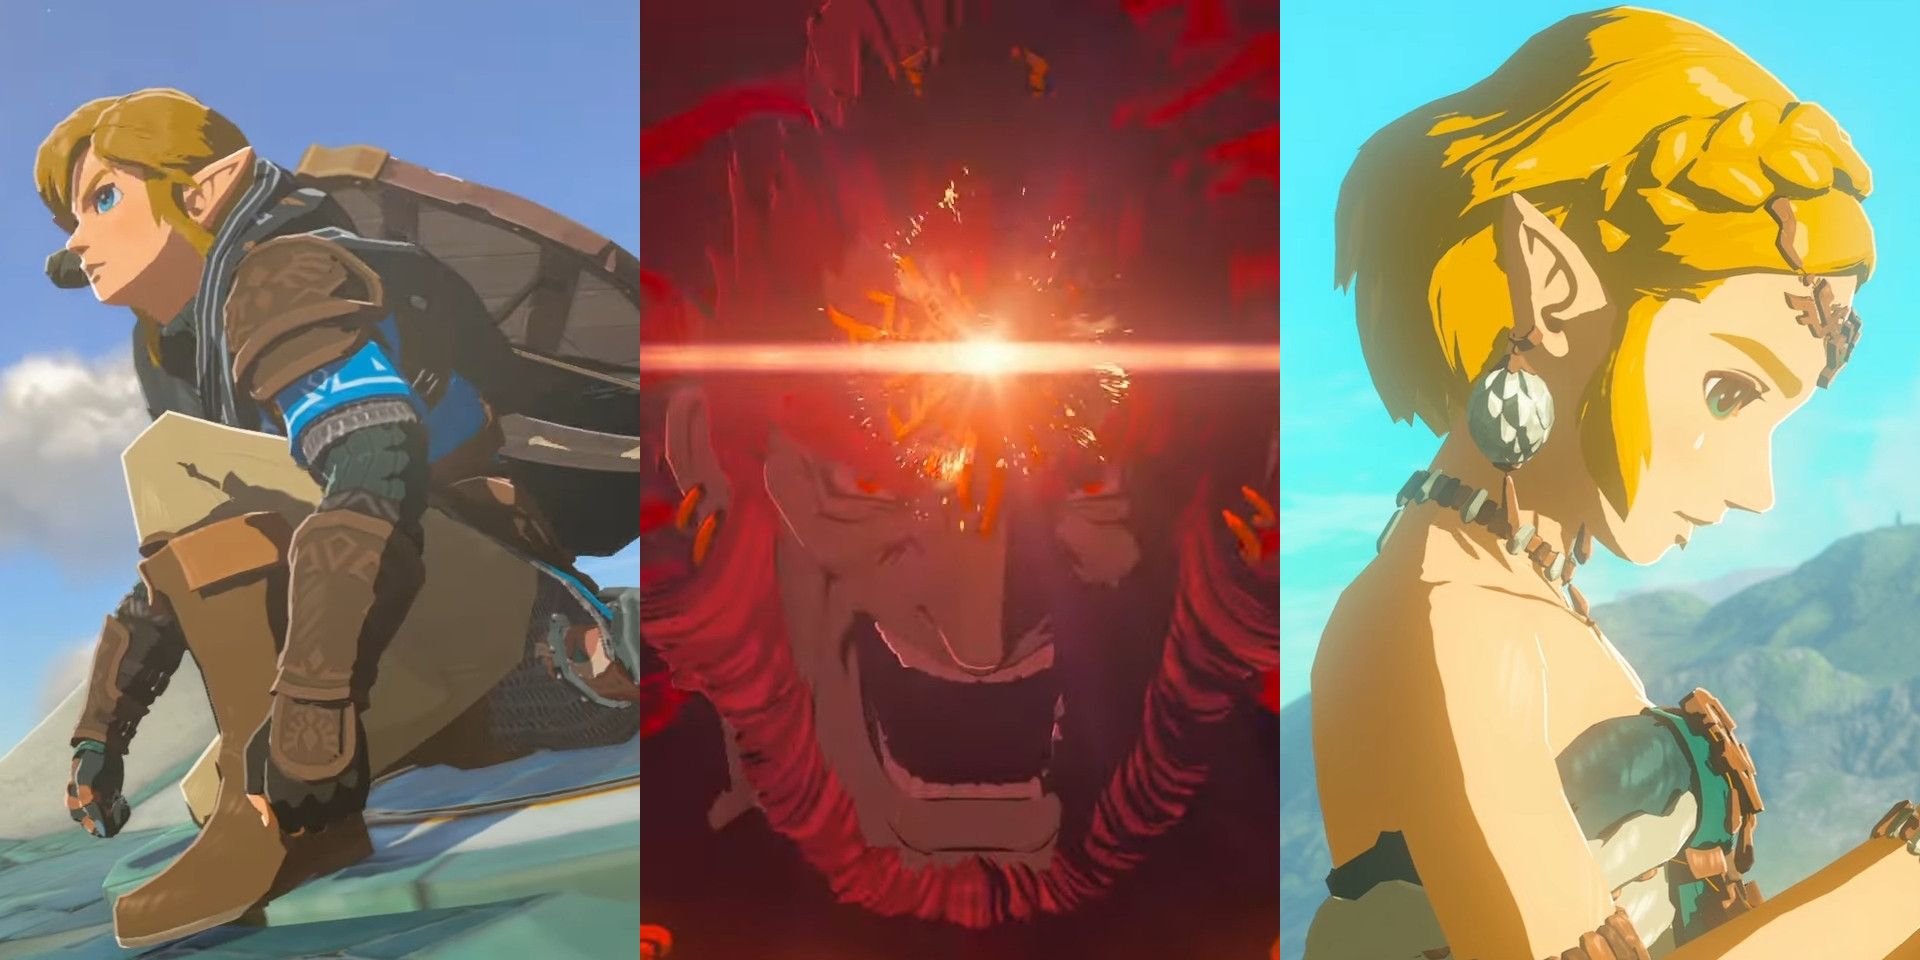 A split image of Link, Ganondorf, and Zelda from Tears of the Kingdom.